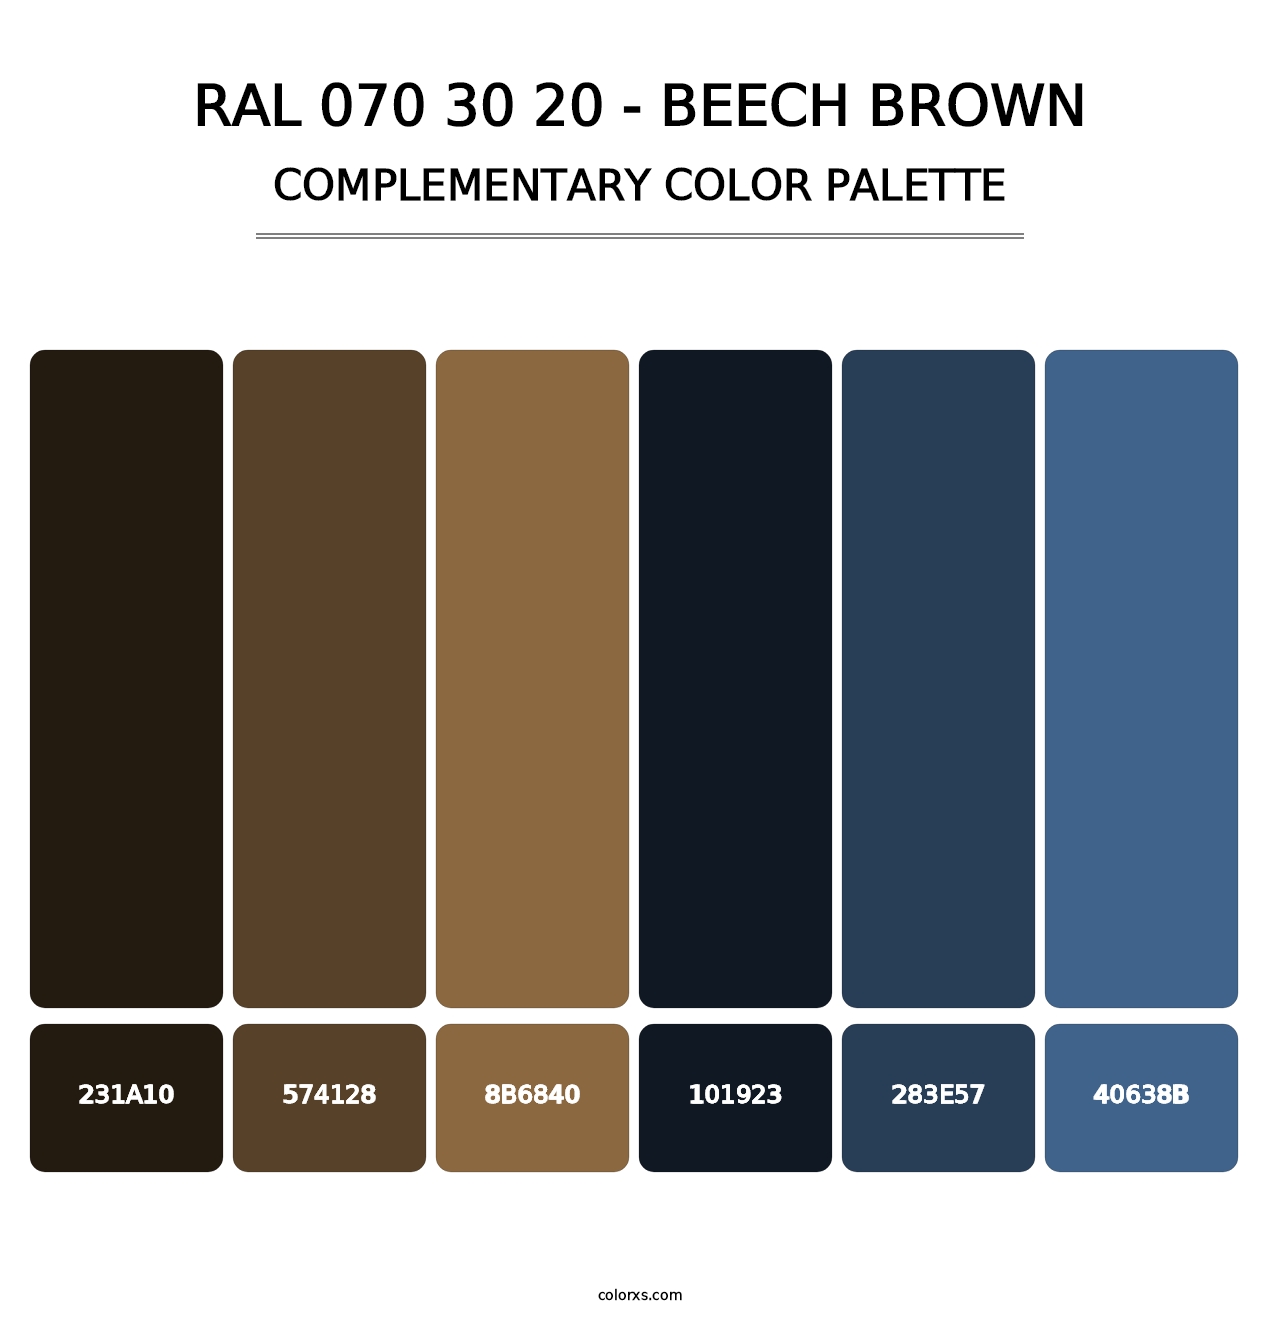 RAL 070 30 20 - Beech Brown - Complementary Color Palette